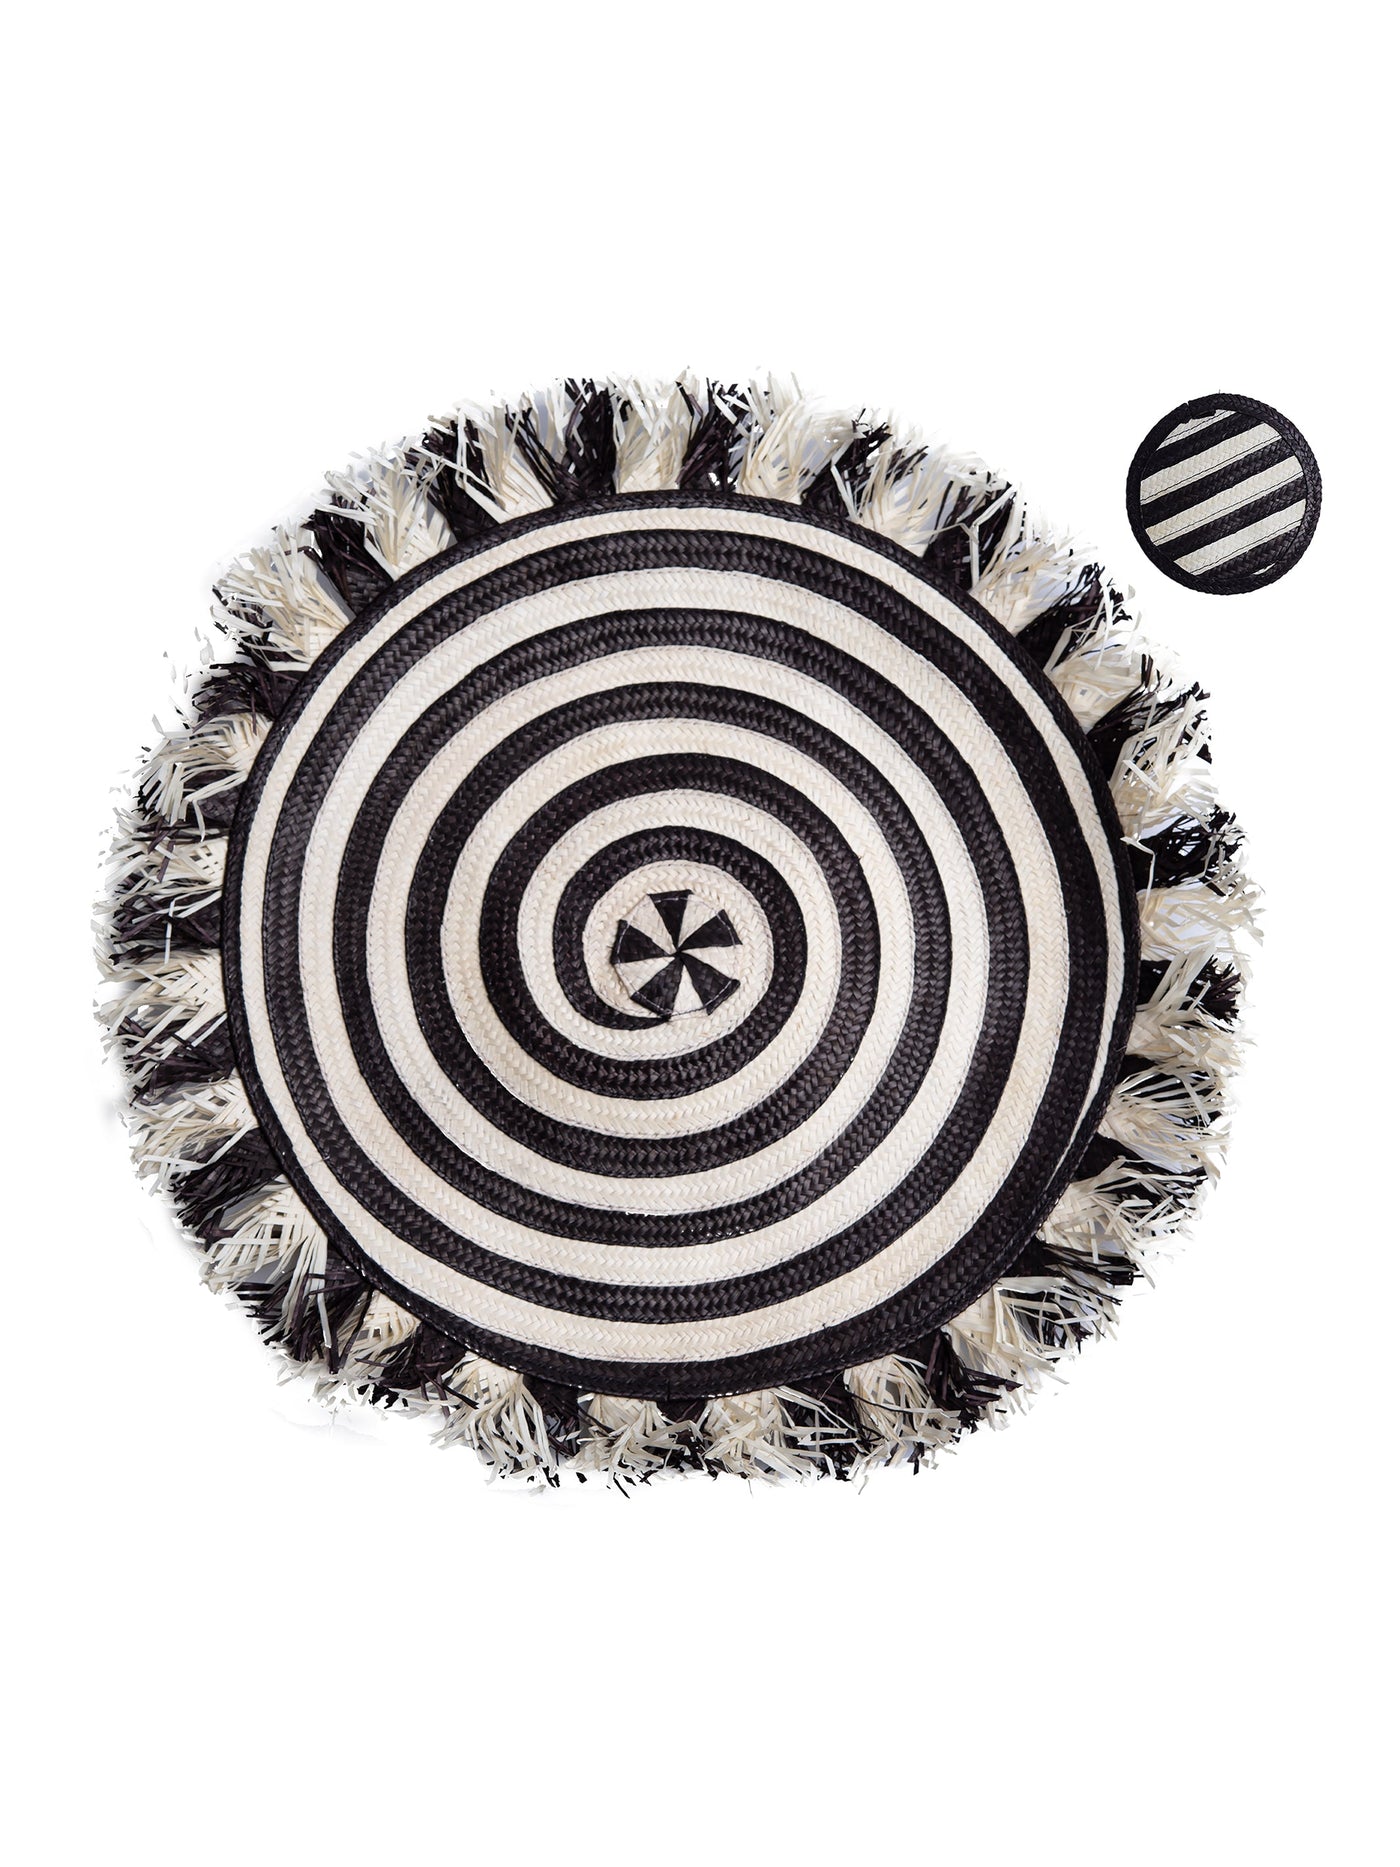 Adriana Castro Zenu Woven Placemat and Coaster Set of Four in Black and White